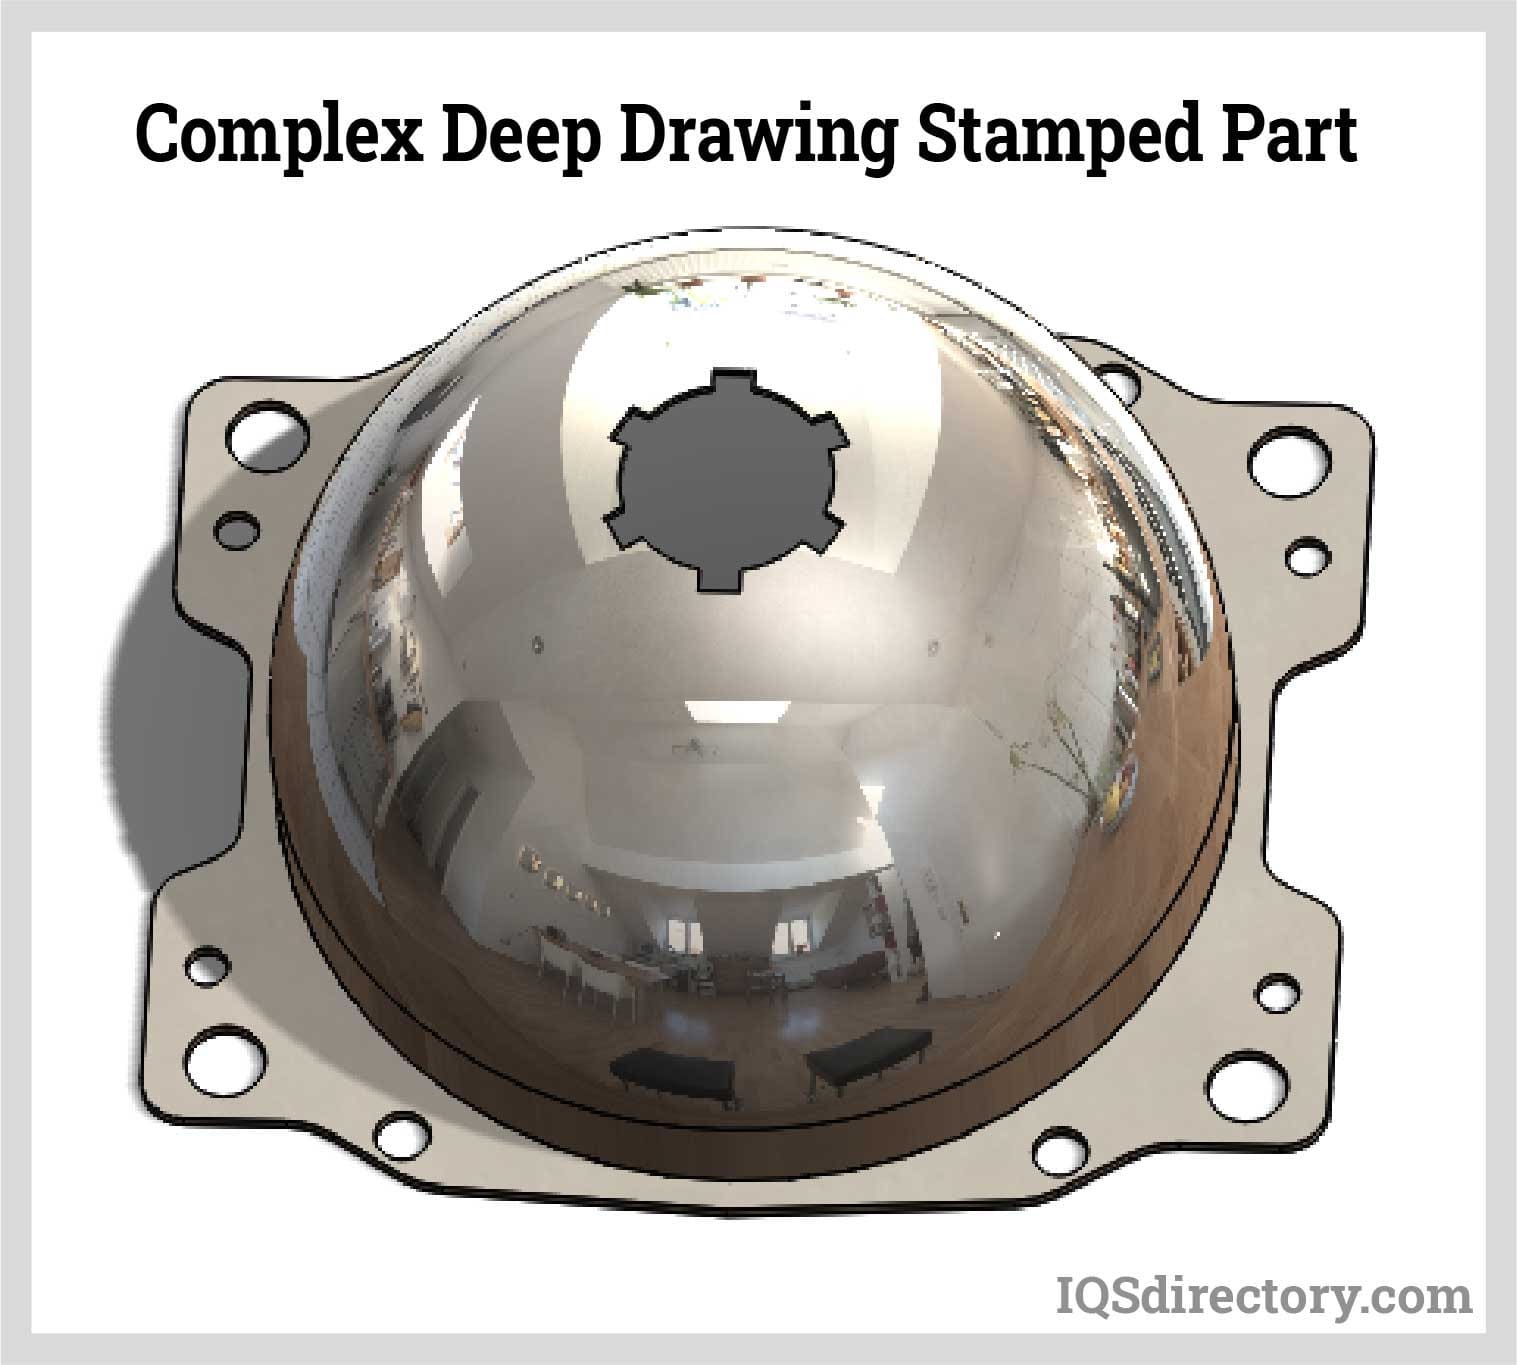 Complex Deep Drawing Stamped Part